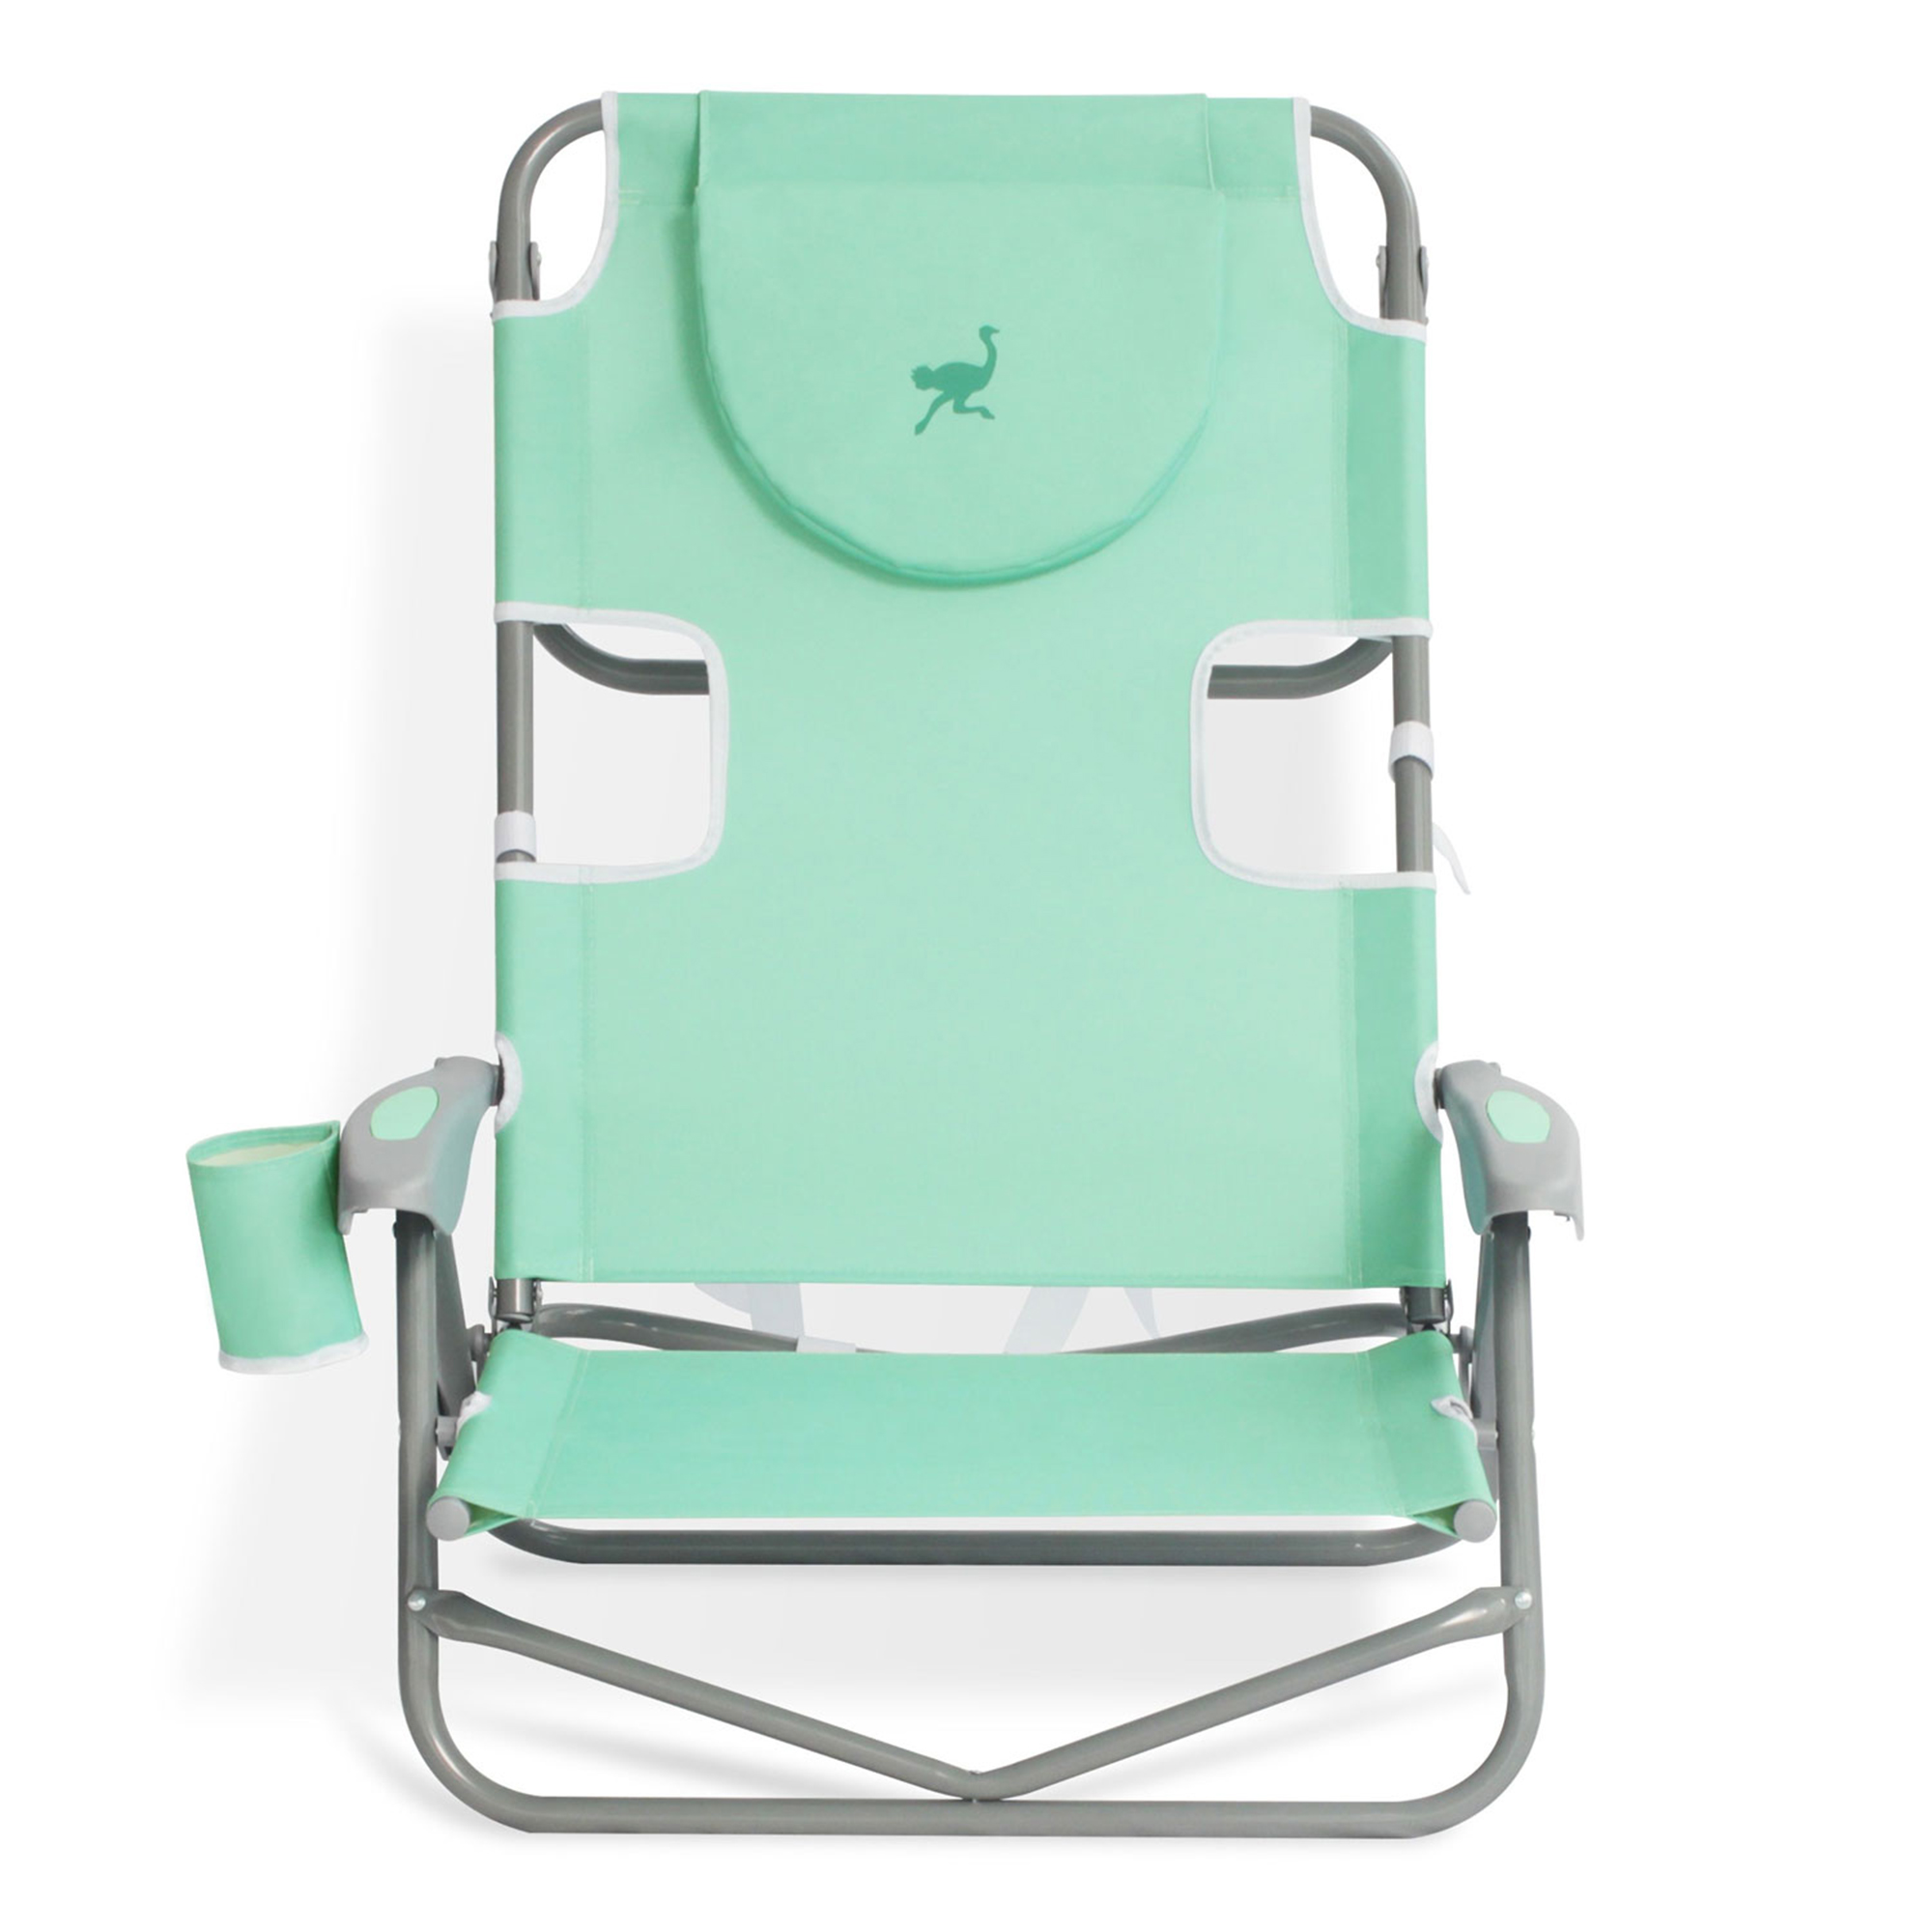 Ostrich On-Your-Back Outdoor Reclining Beach Pool Camping Chair, Teal - image 1 of 12